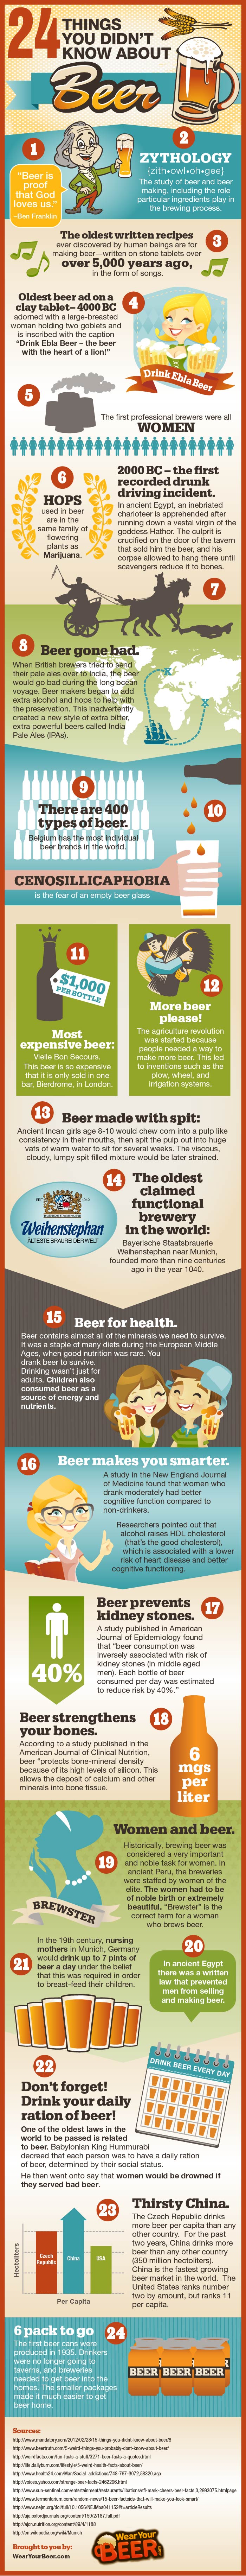 24 Things You Didn’t Know About Beer